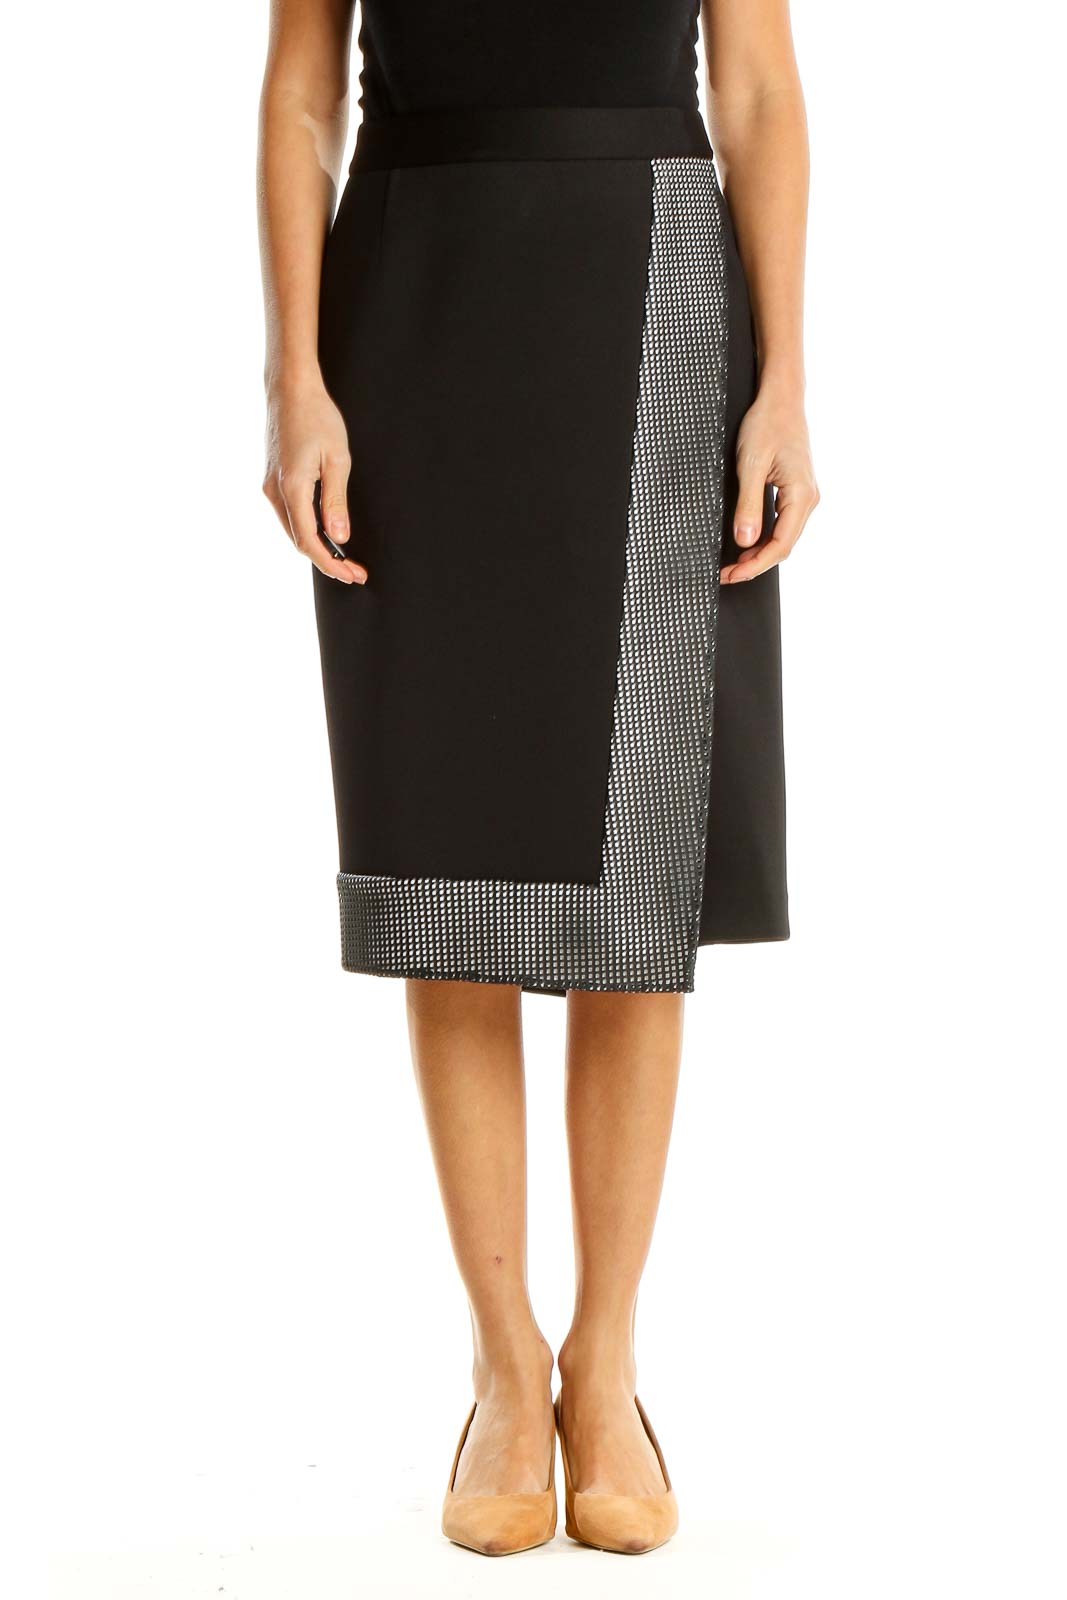 Black Brunch Pencil Skirt with Mesh Panel Front